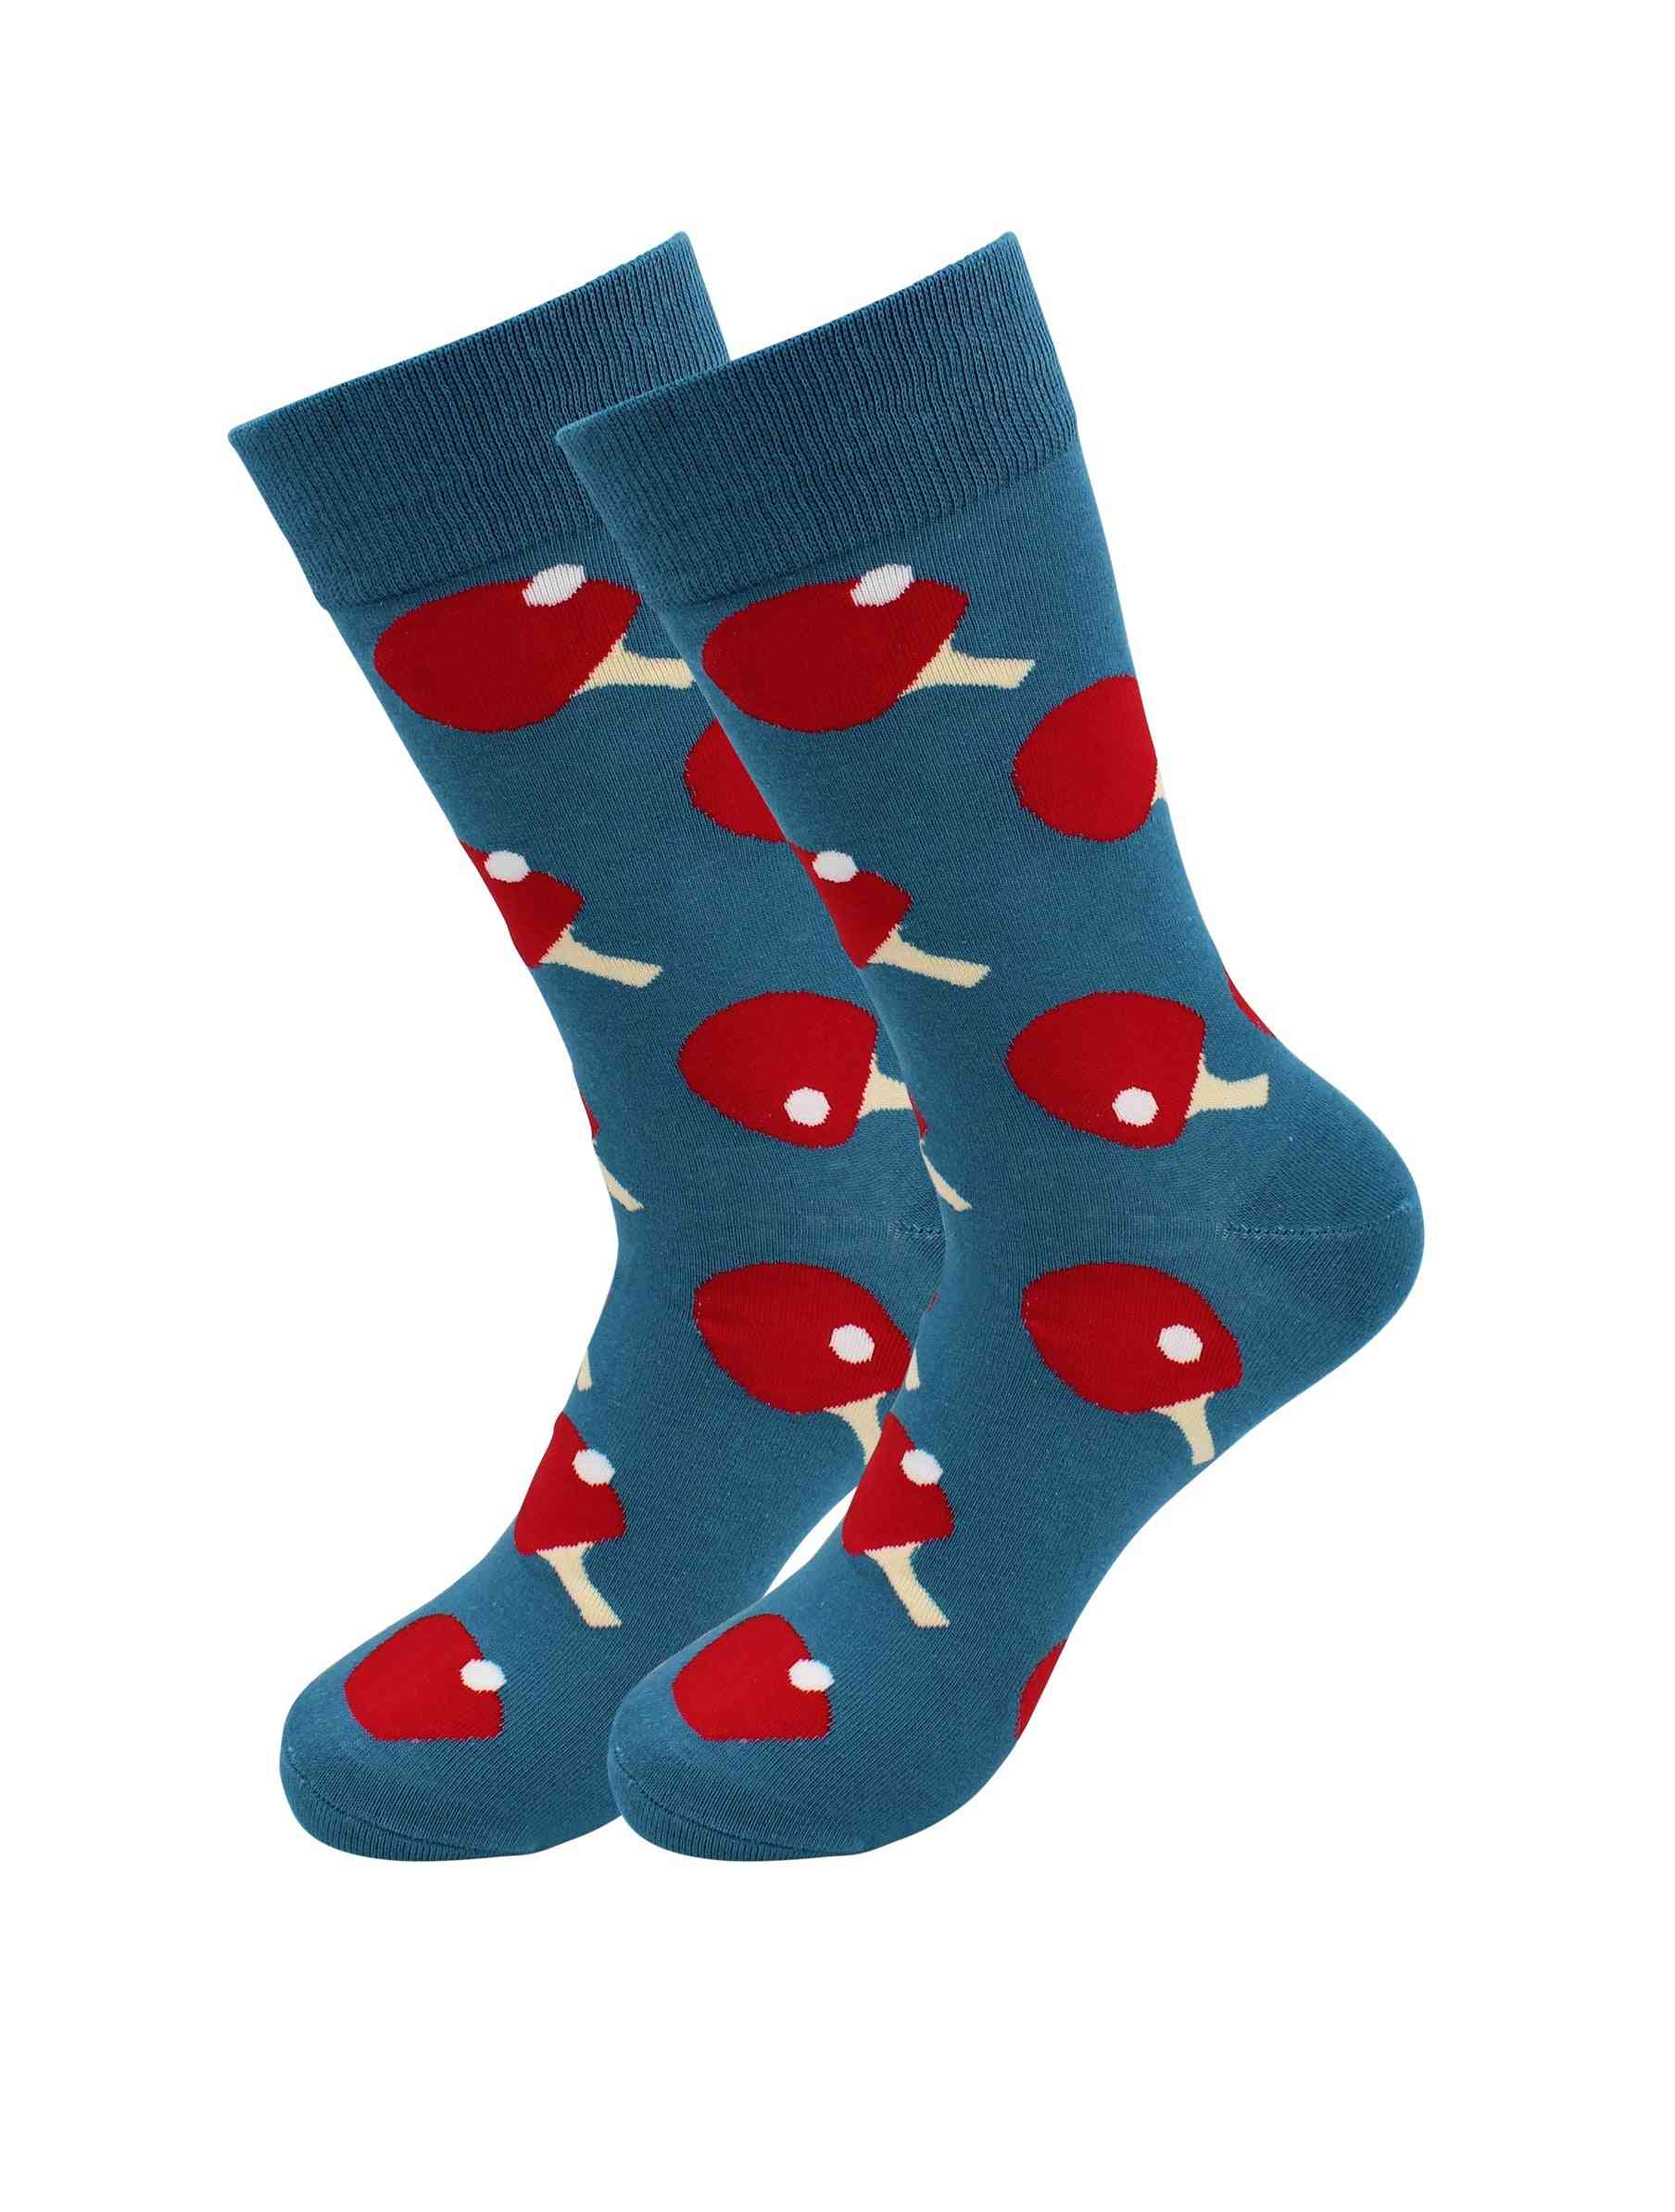 Ping-pong – Off The Wall Casual Dress Socks